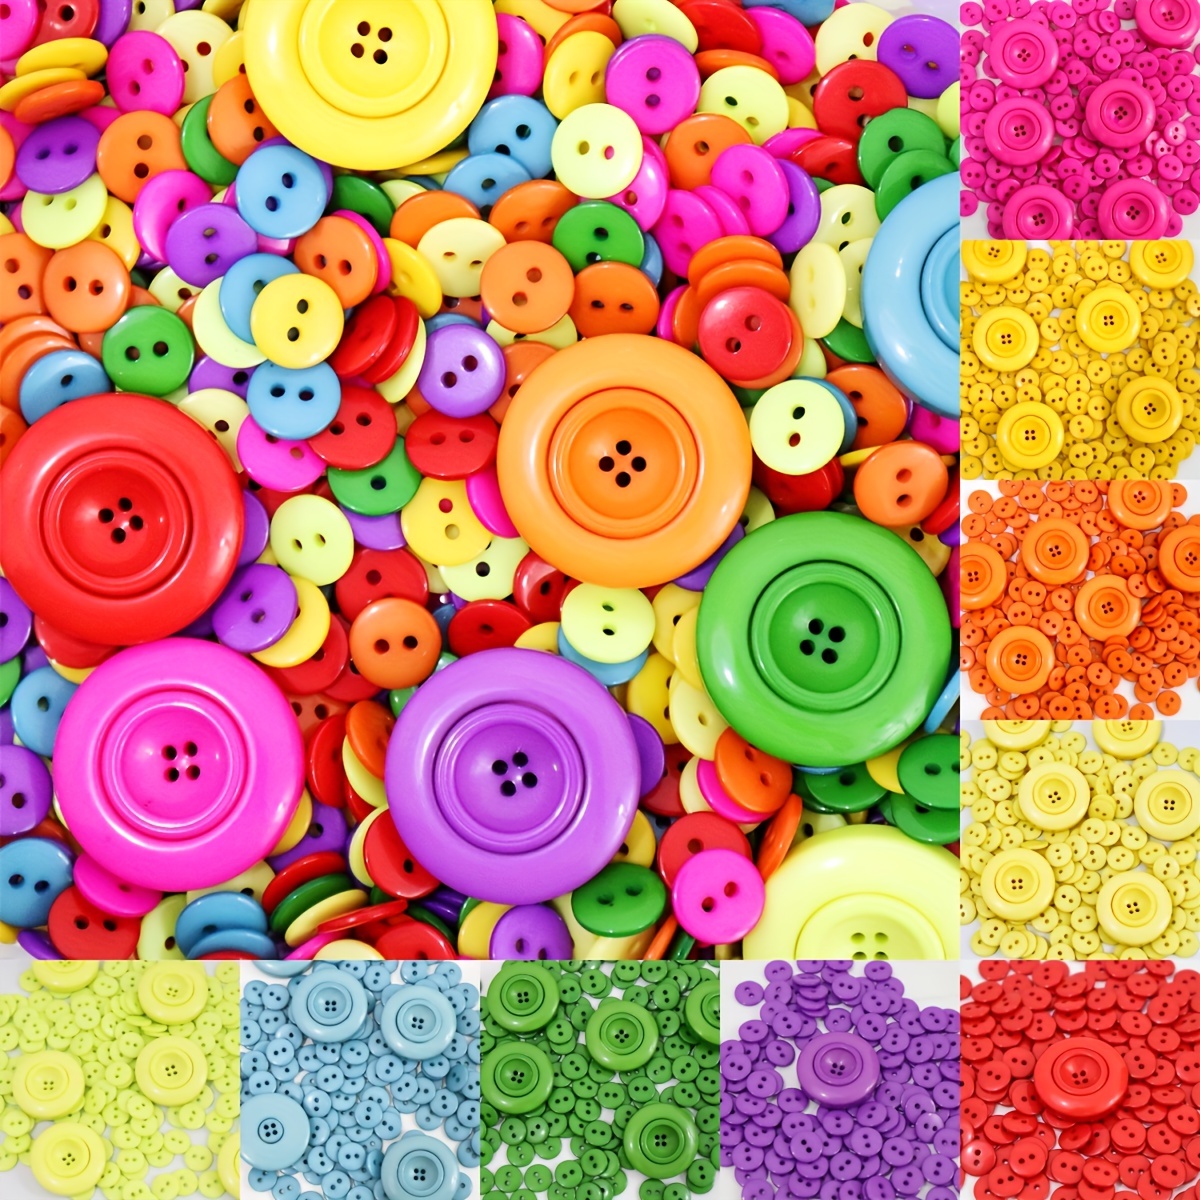 100 Pcs Rainbow 4 Holes Round Buttons Size 11 Mm for Sewing Crafts  Accessories